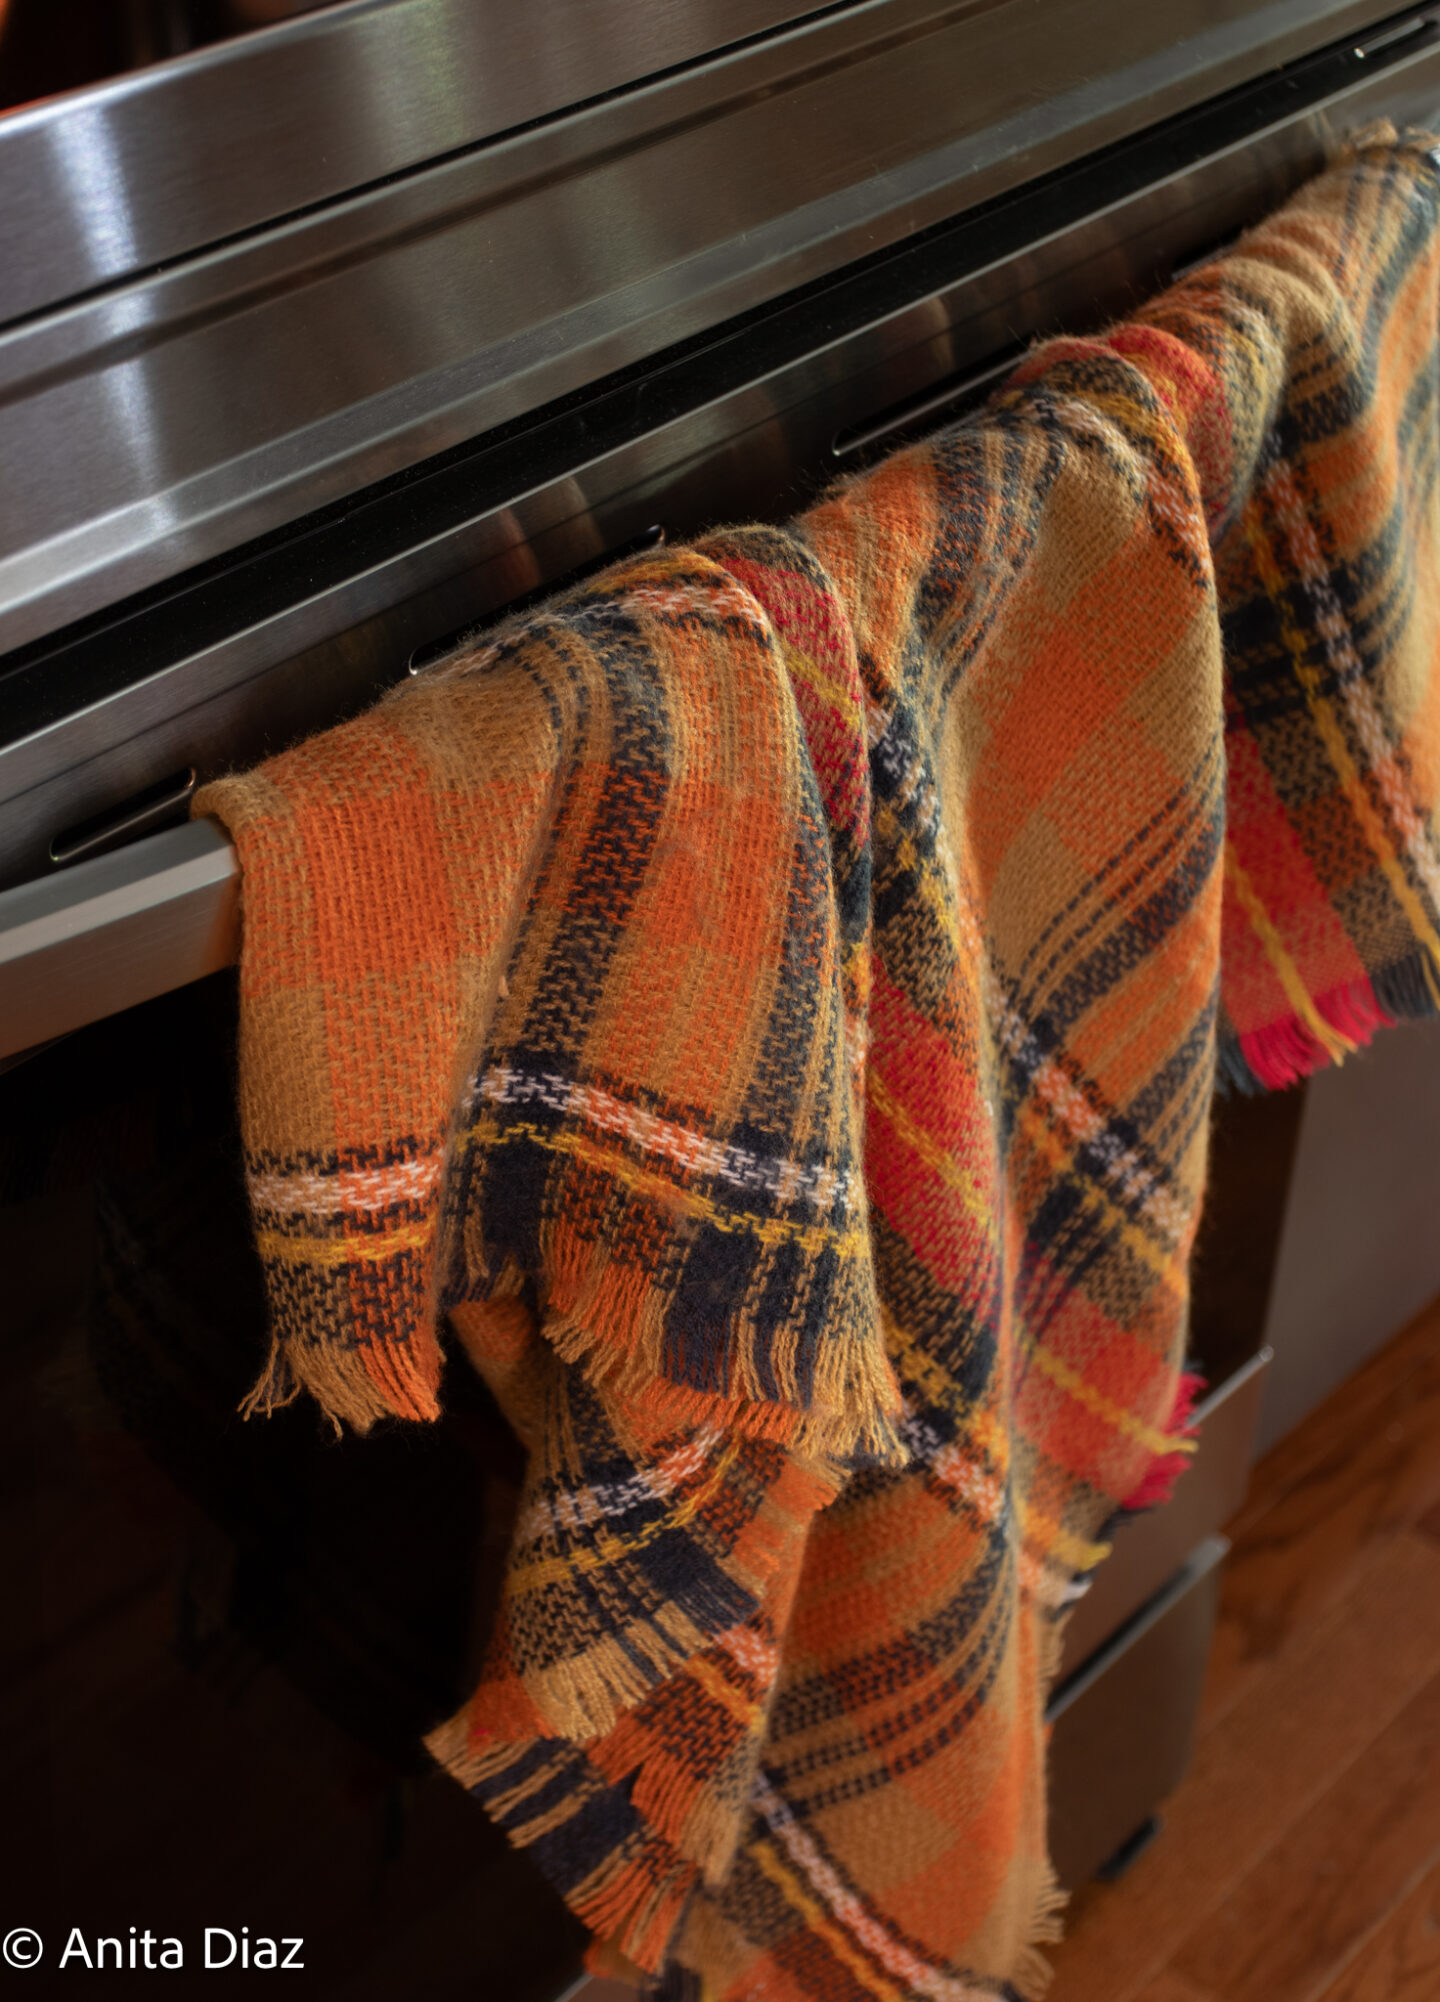 Serafina Home Decorative Fall Kitchen Towels with Autumn Days and Orange  Country Plaid Theme, Set of 4